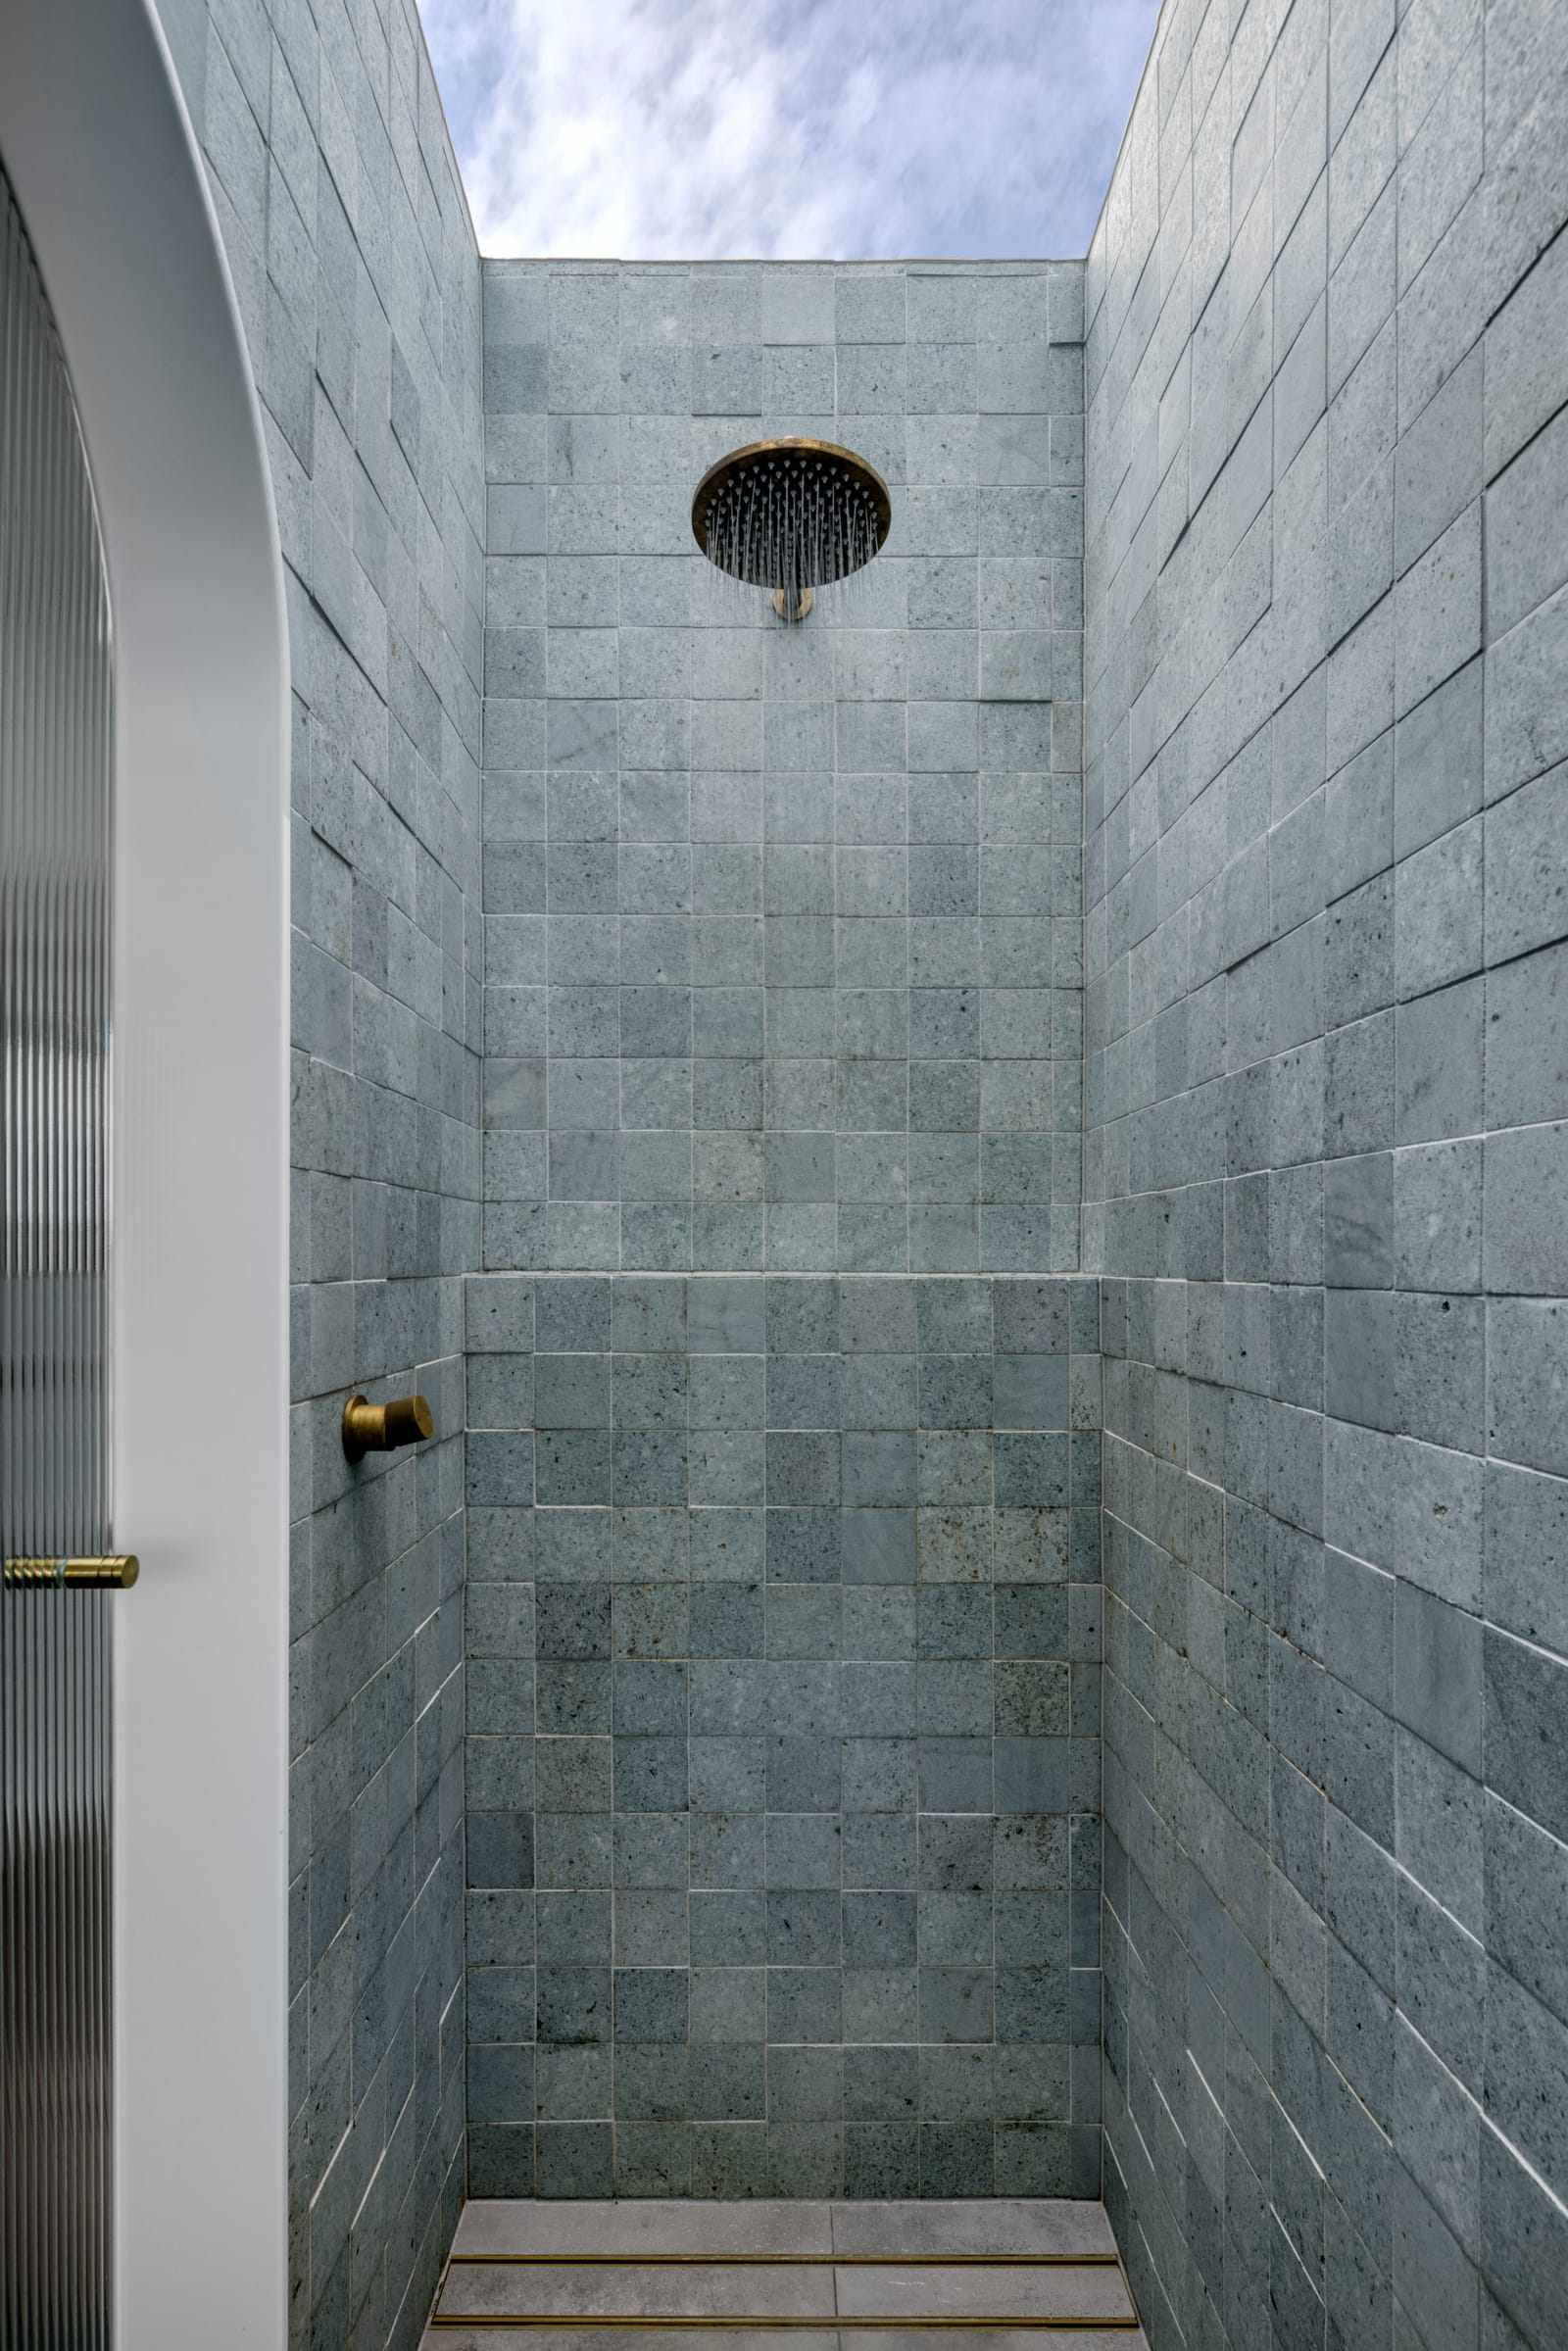 A Par Taps Shower Head and Wall mixer in brass in a green tiled shower space with a skylight above